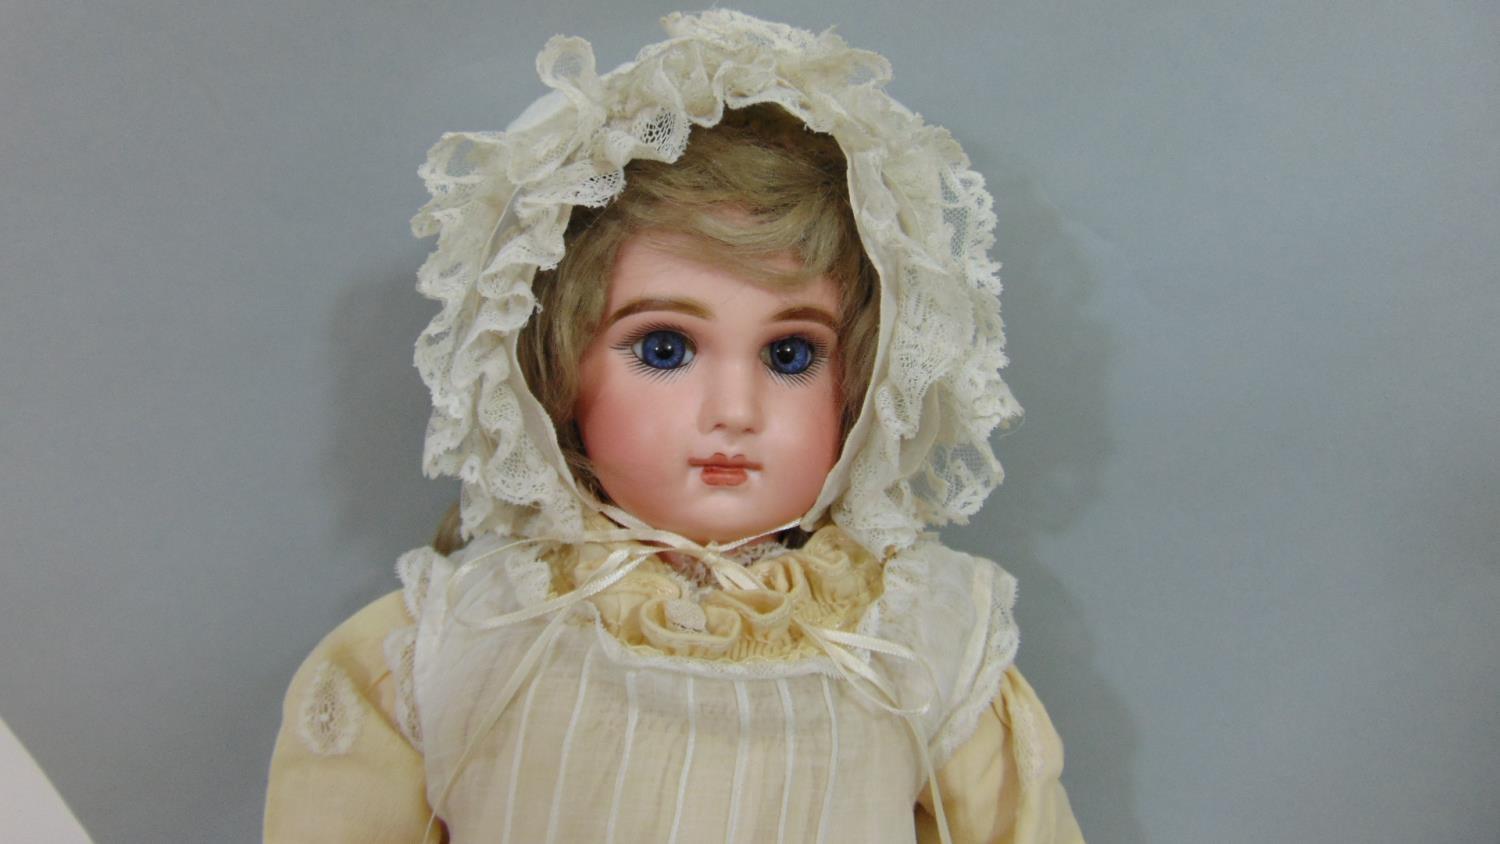 Jumeau bisque socket head doll with jointed composition body, with fixed blue eyes, painted - Image 7 of 7